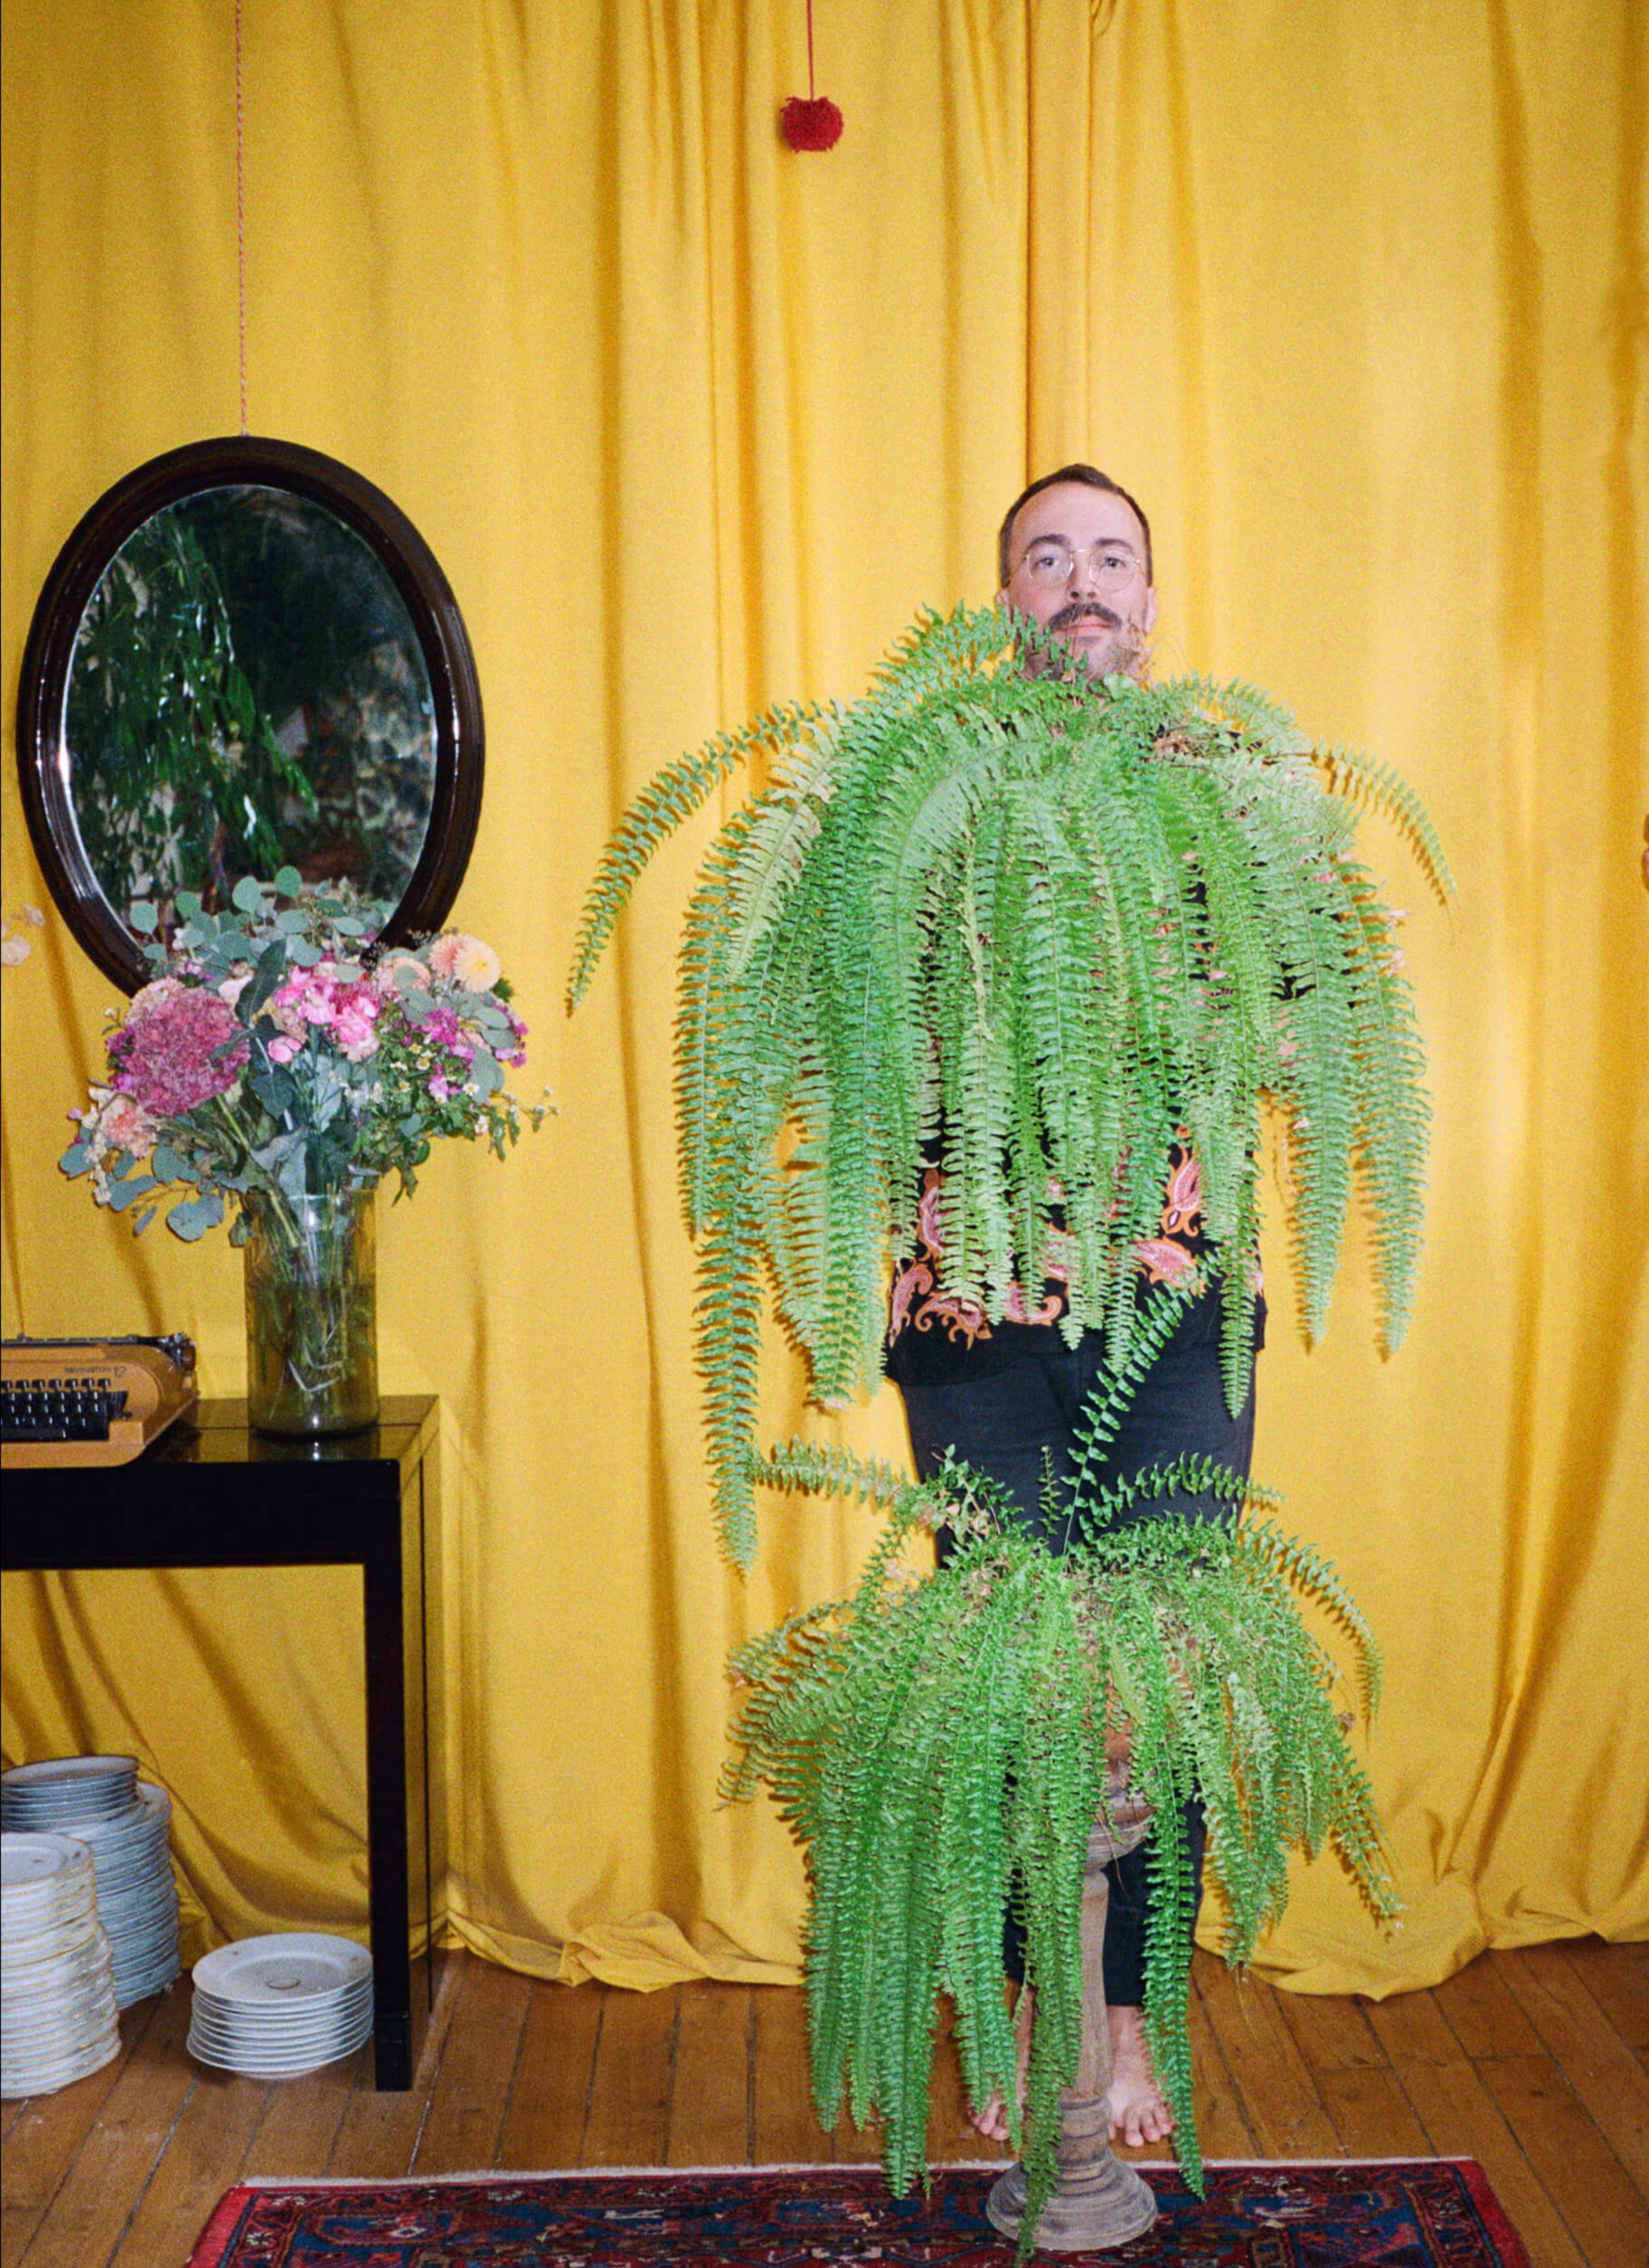 Arnold held a potted plant while another potted plant is in front of him. There are a vase filled with flowers sitting on the desk while an oval shape mirror hung on the yellow curtains in the background.